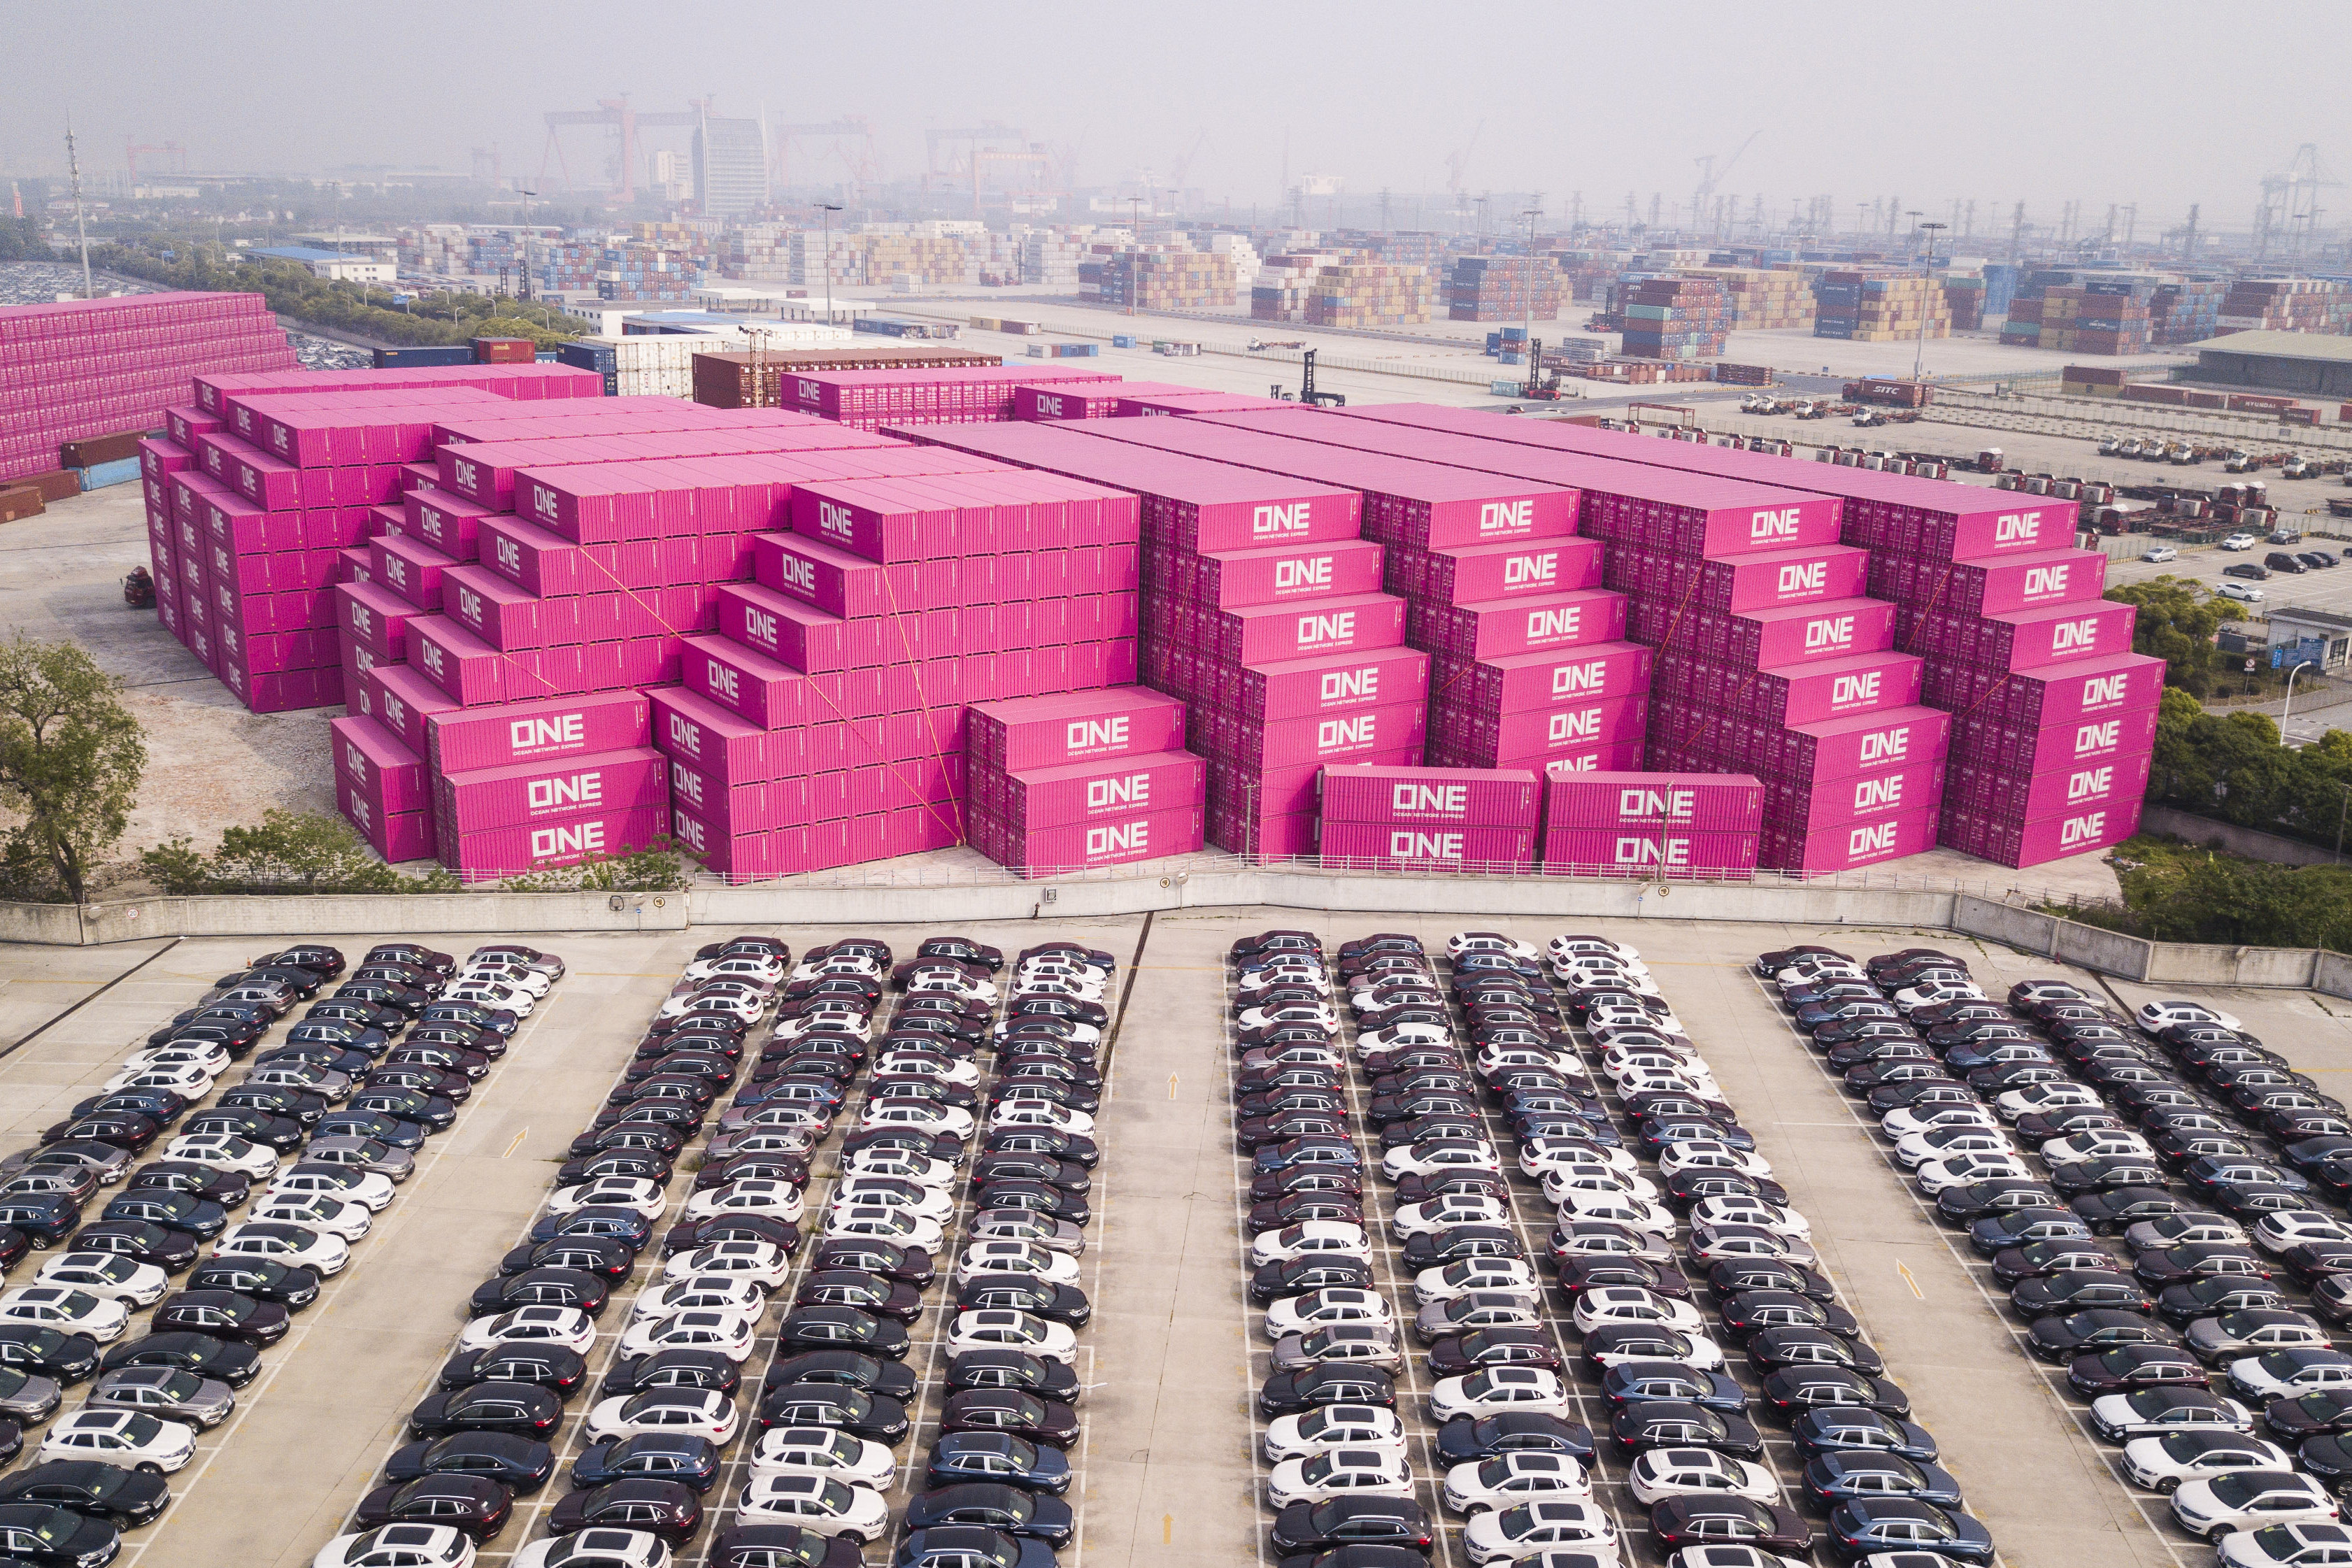 Vehicles awaiting exports next to stacks of containers by Ocean Network Express (ONE) in Shanghai on Monday, April 30, 2018. Photo: Bloomberg.